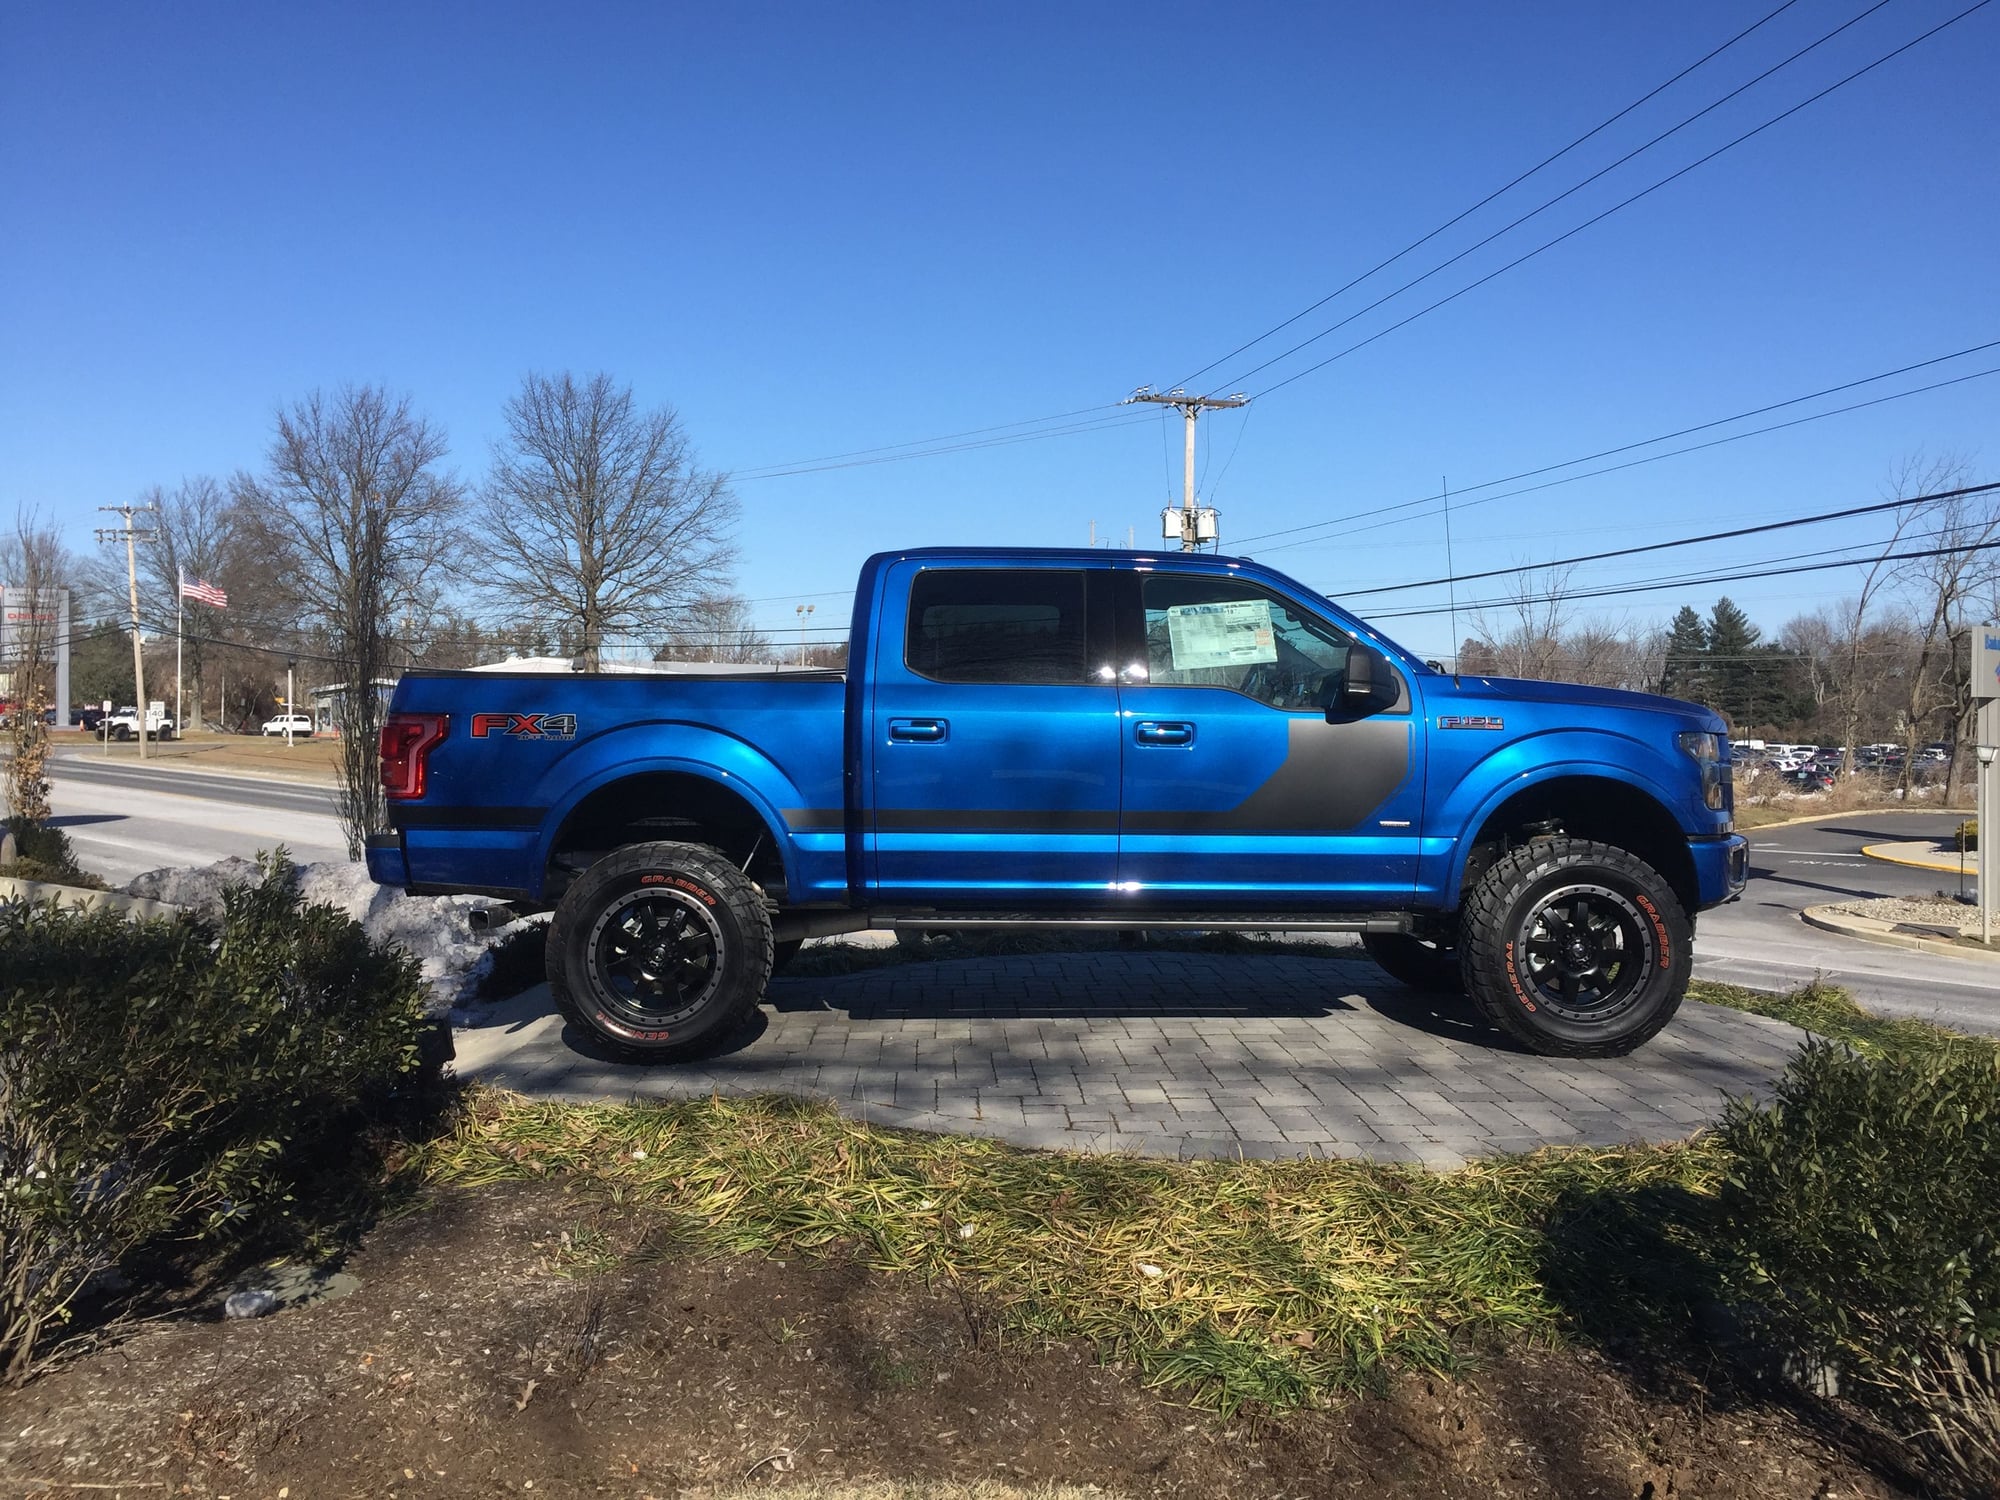 Corrosion on new 2016 f150 at dealer - Ford F150 Forum ...